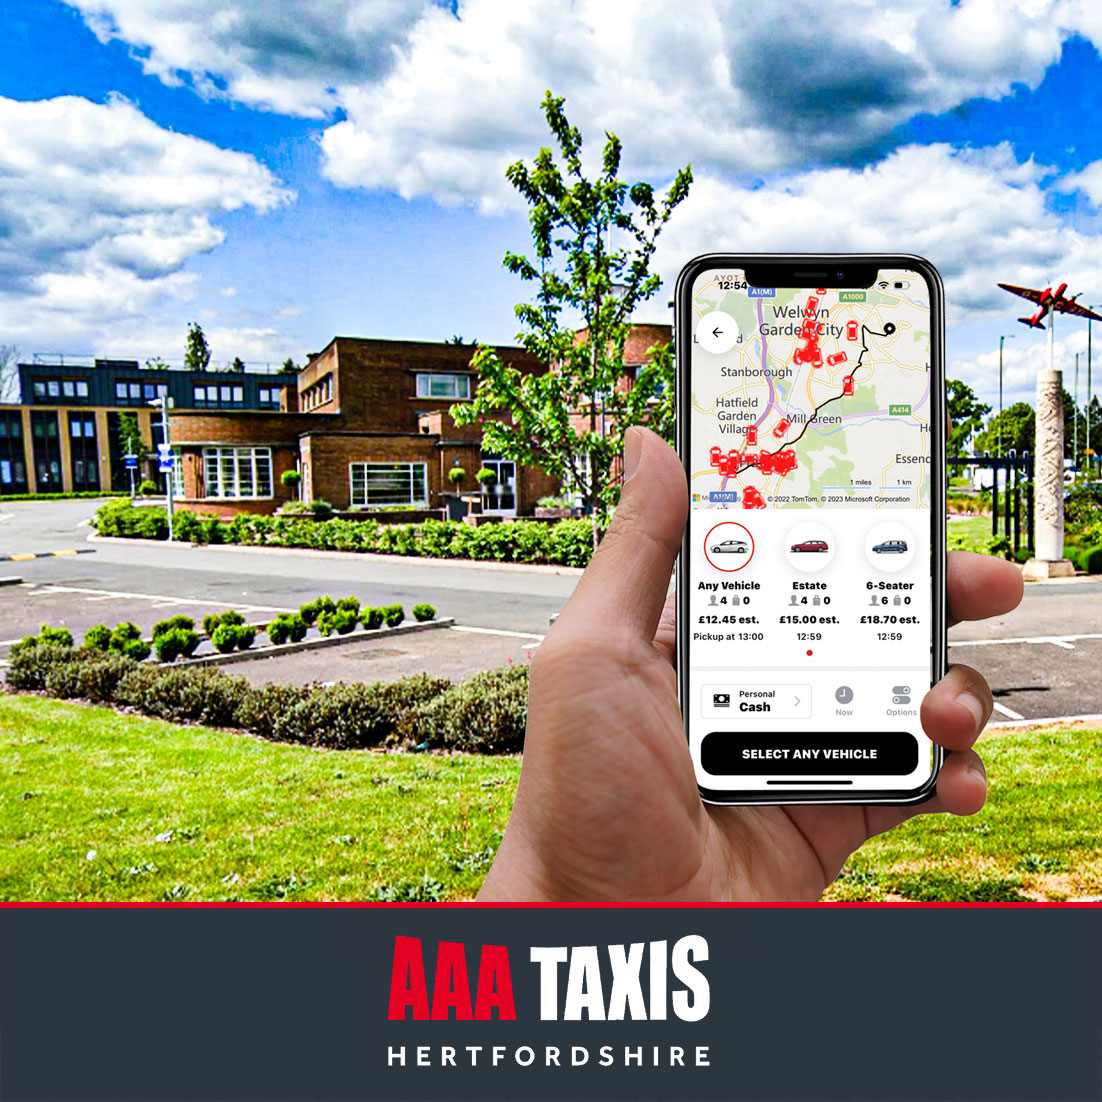 Staying at The Comet or a local hotel here in Hertfordshire and need a local taxi?   
Book your AAA Taxi here onelink.to/aaataxis or call us on 01707 888 888.
#AAAtaxis #Hatfield #WGC #Hertford #Barnet #pottersbar  #StAlbans